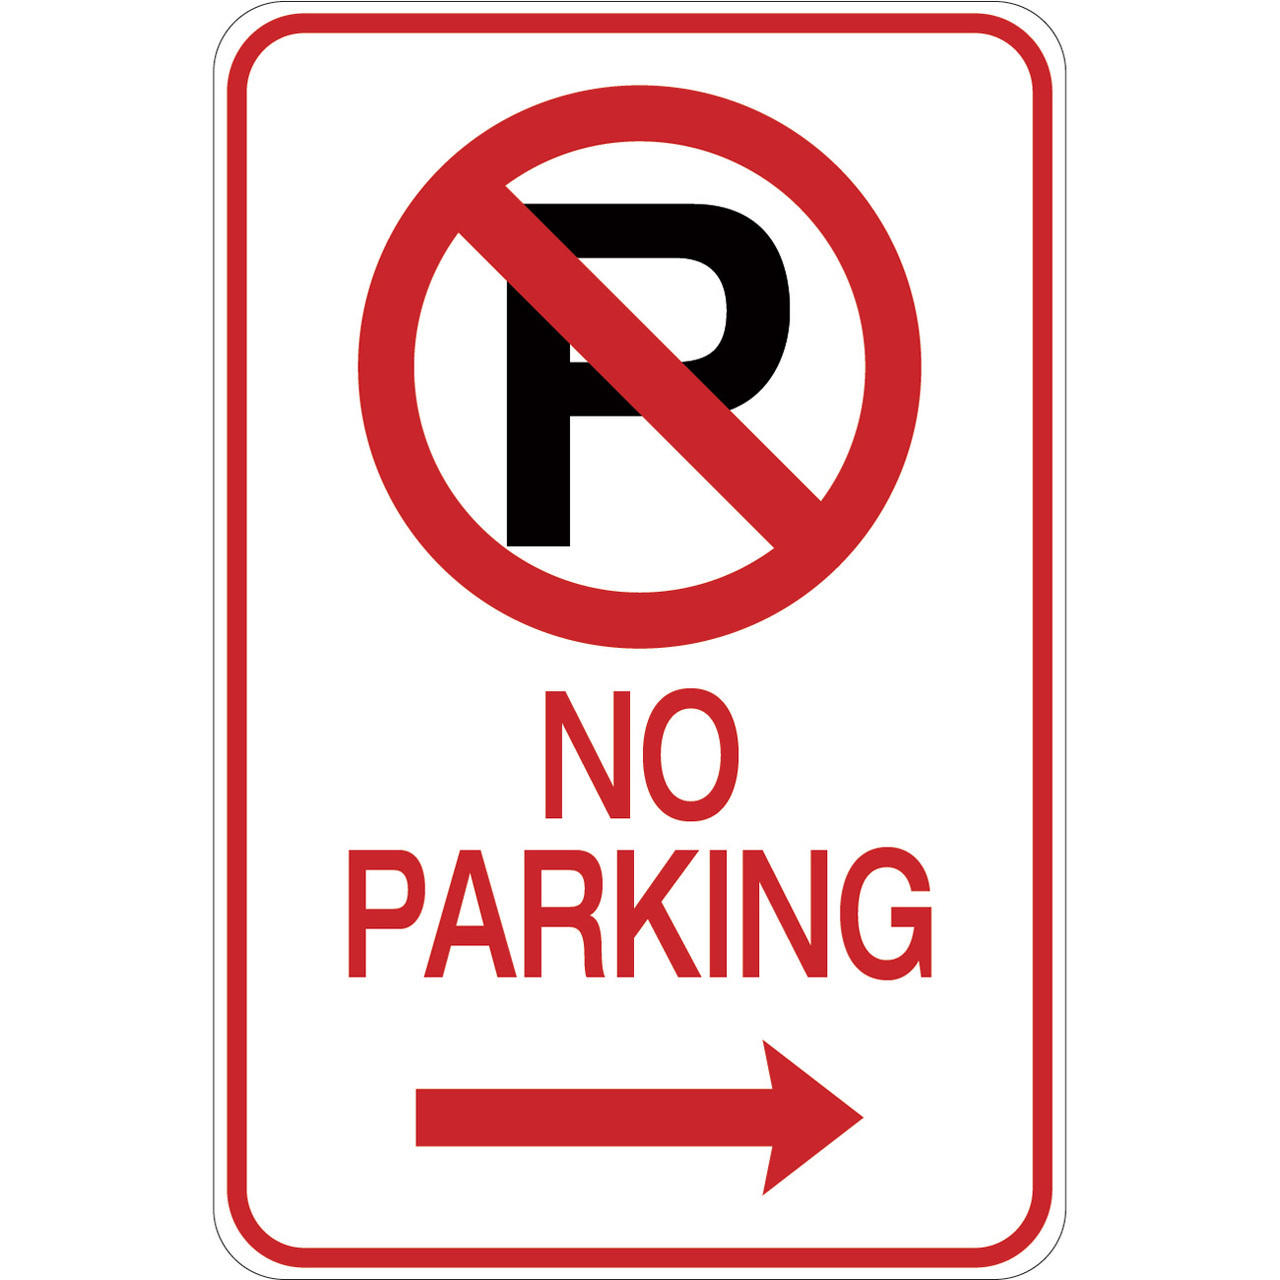 No Parking (with right arrow) - Aluminum Sign - Reflective